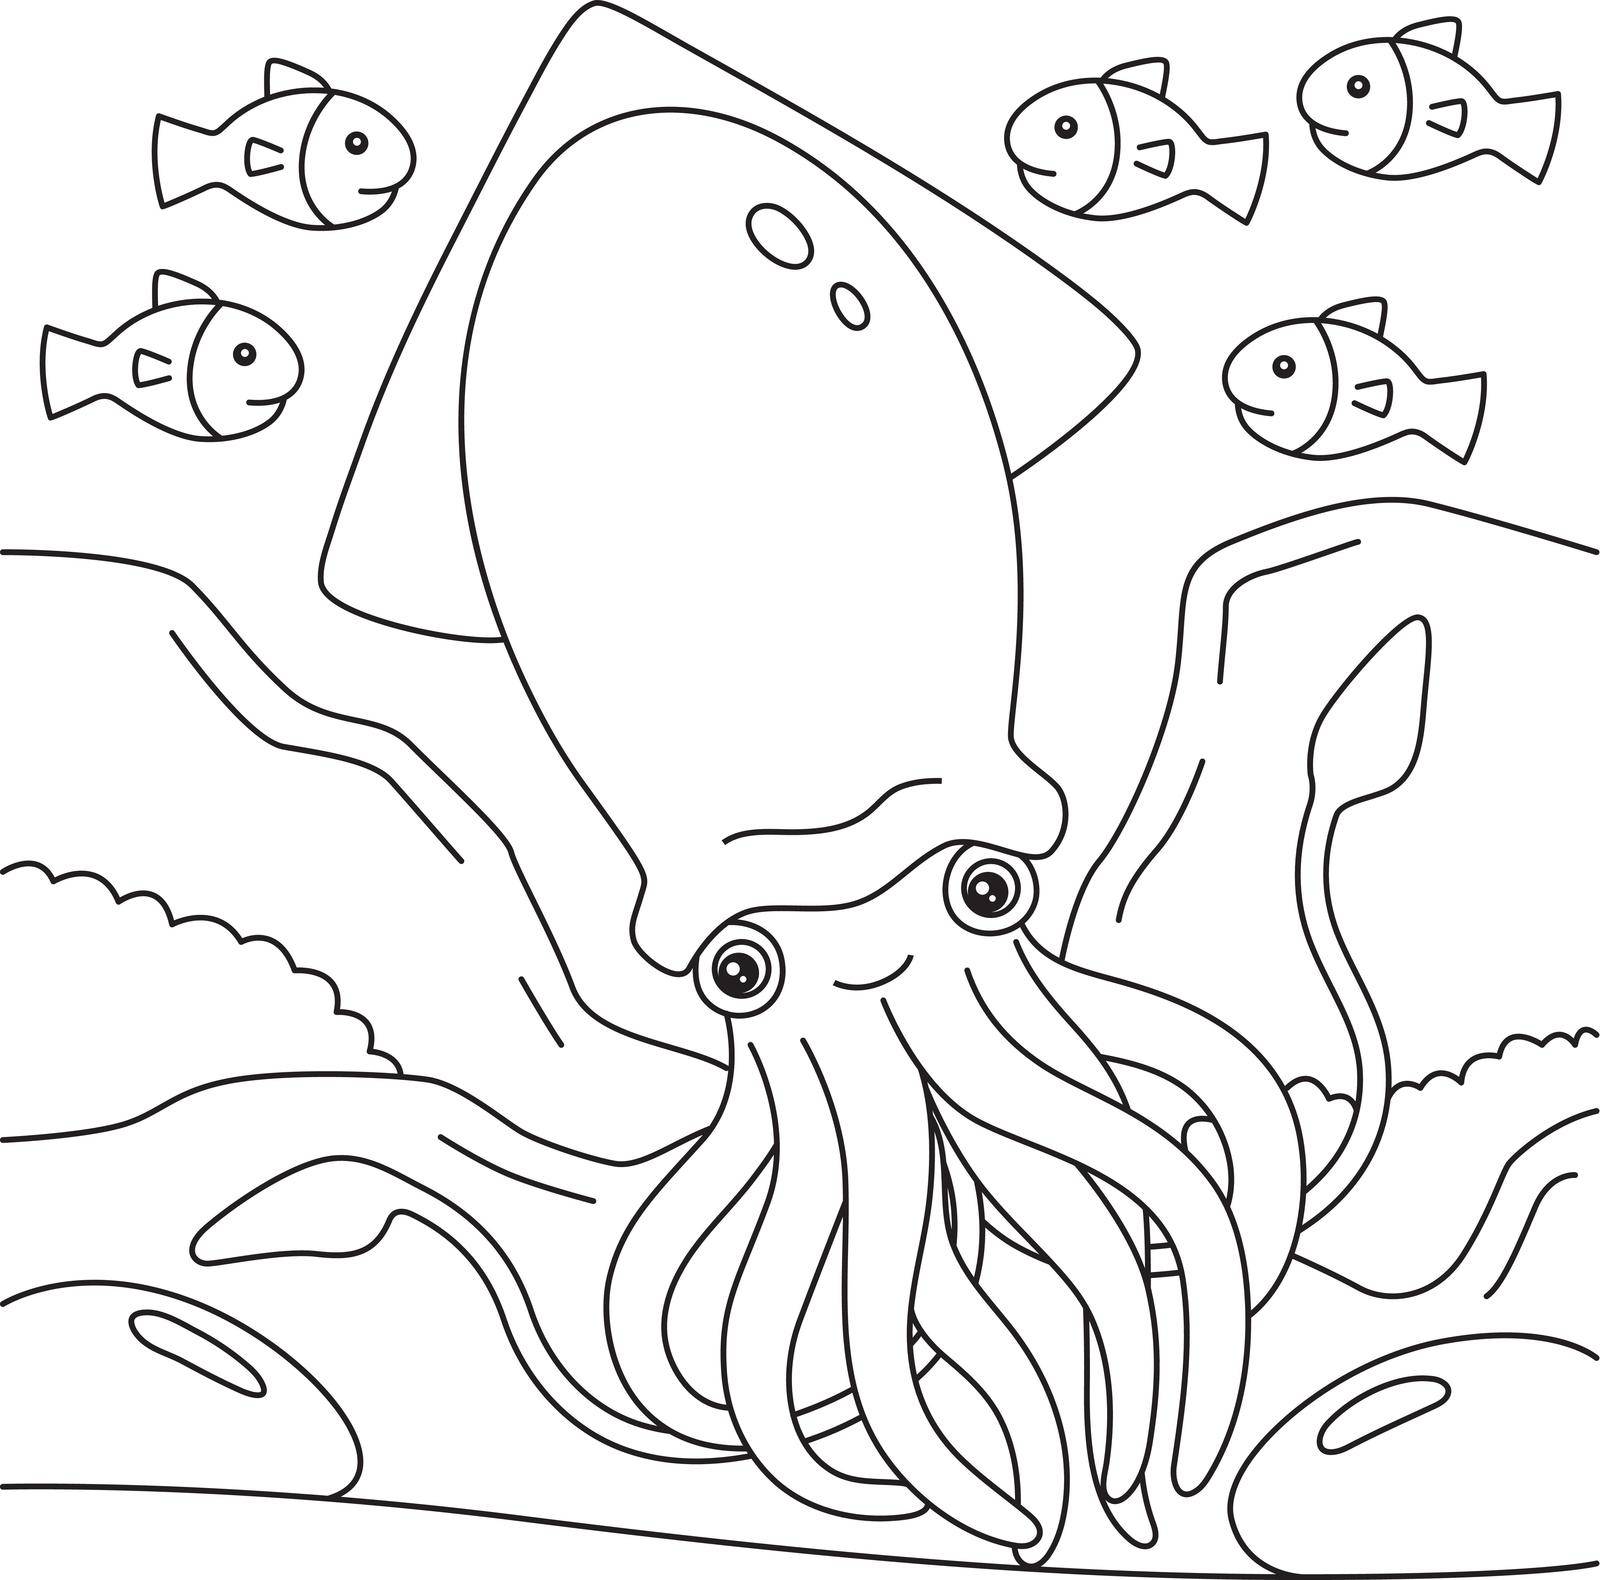 Giant Squid Coloring Page for Kids by abbydesign